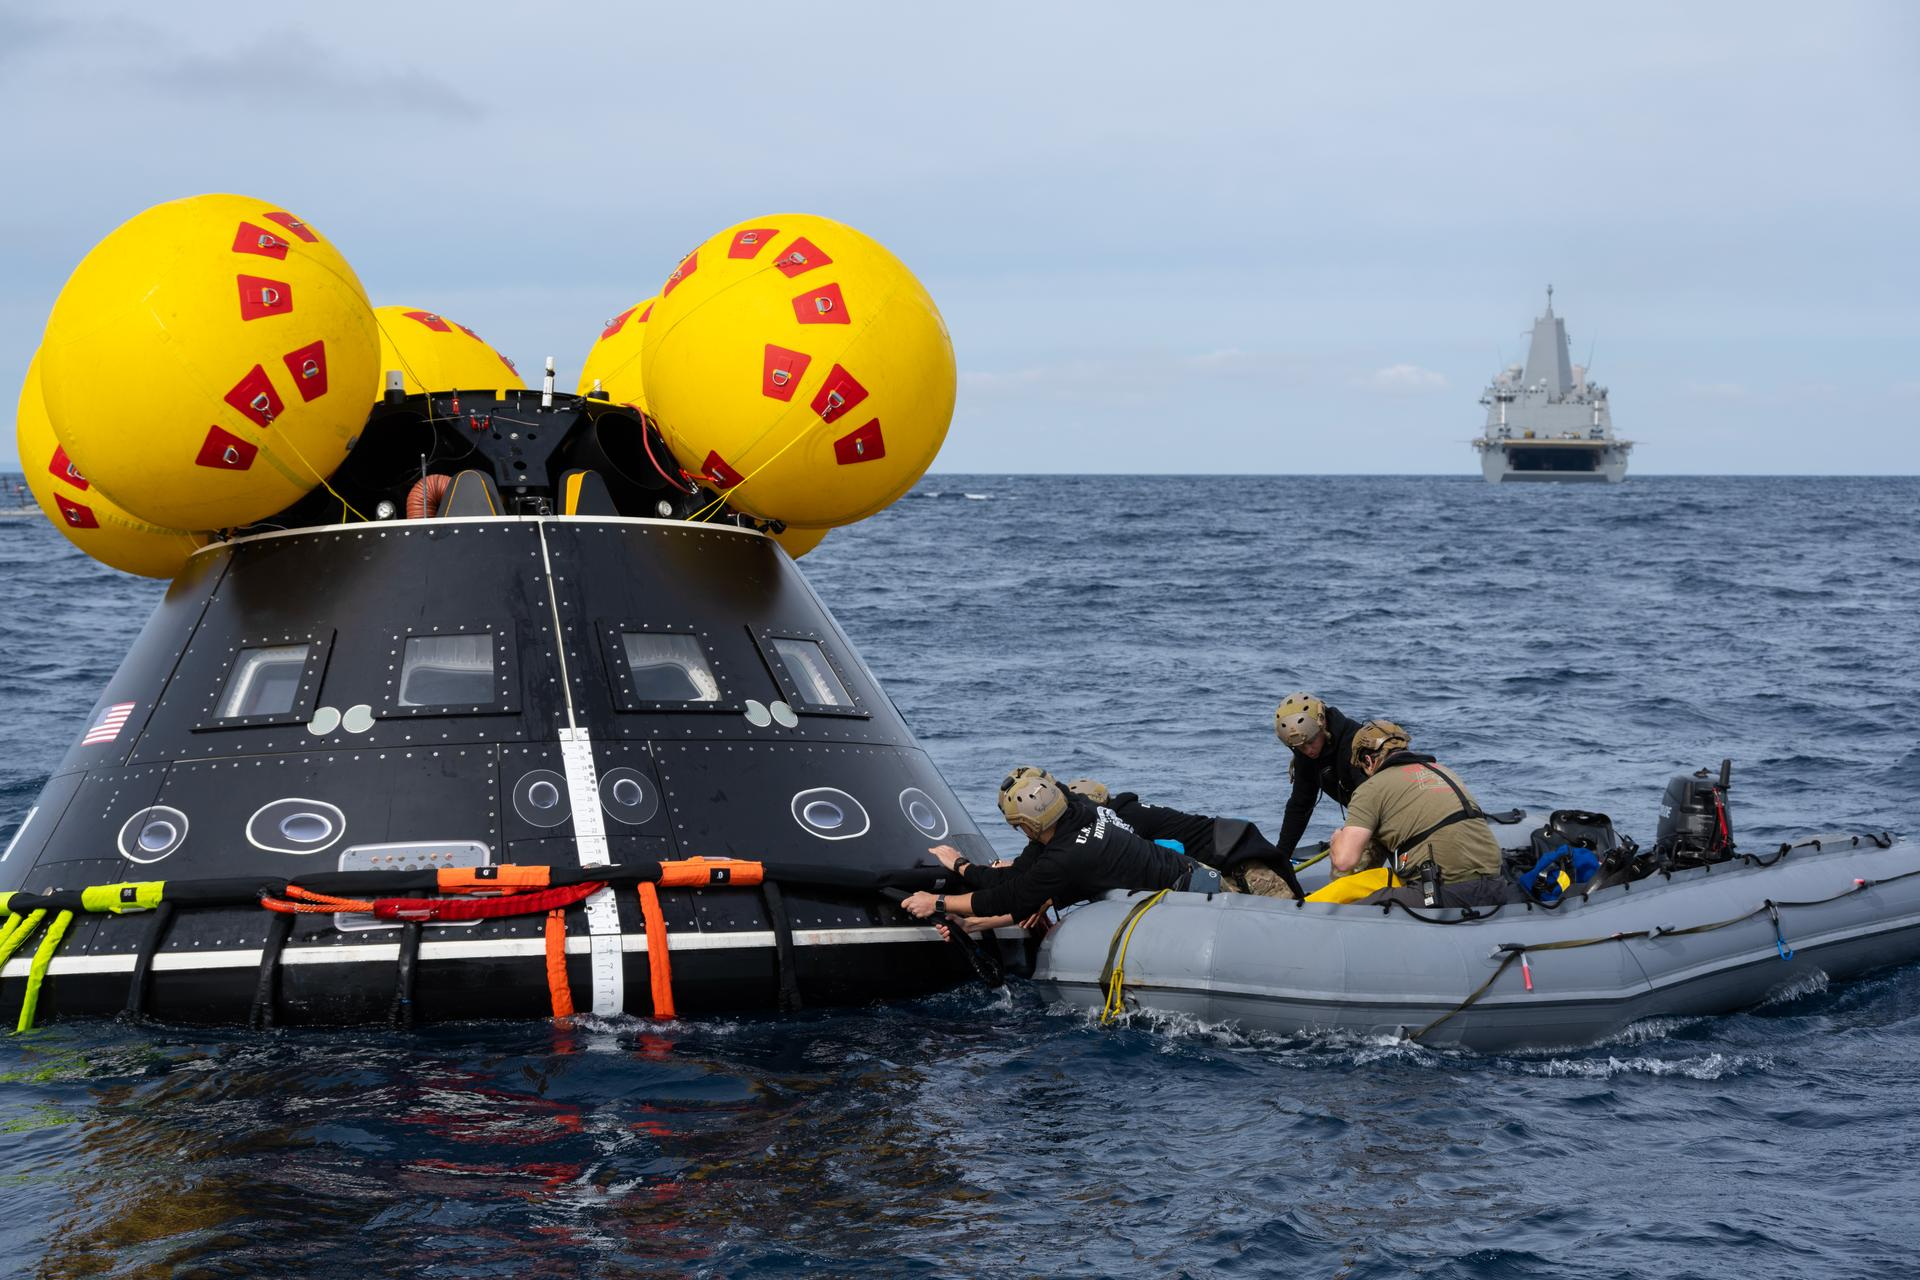 a black space capsule floats in the ocean. Its top is crowned with several inflated yellow balls. Four individuals in a grey inflatable boat are facing the capsule. A couple are securing something with their hands on the capsule. In the distance, a grey NAVY ship floats on the horizon.